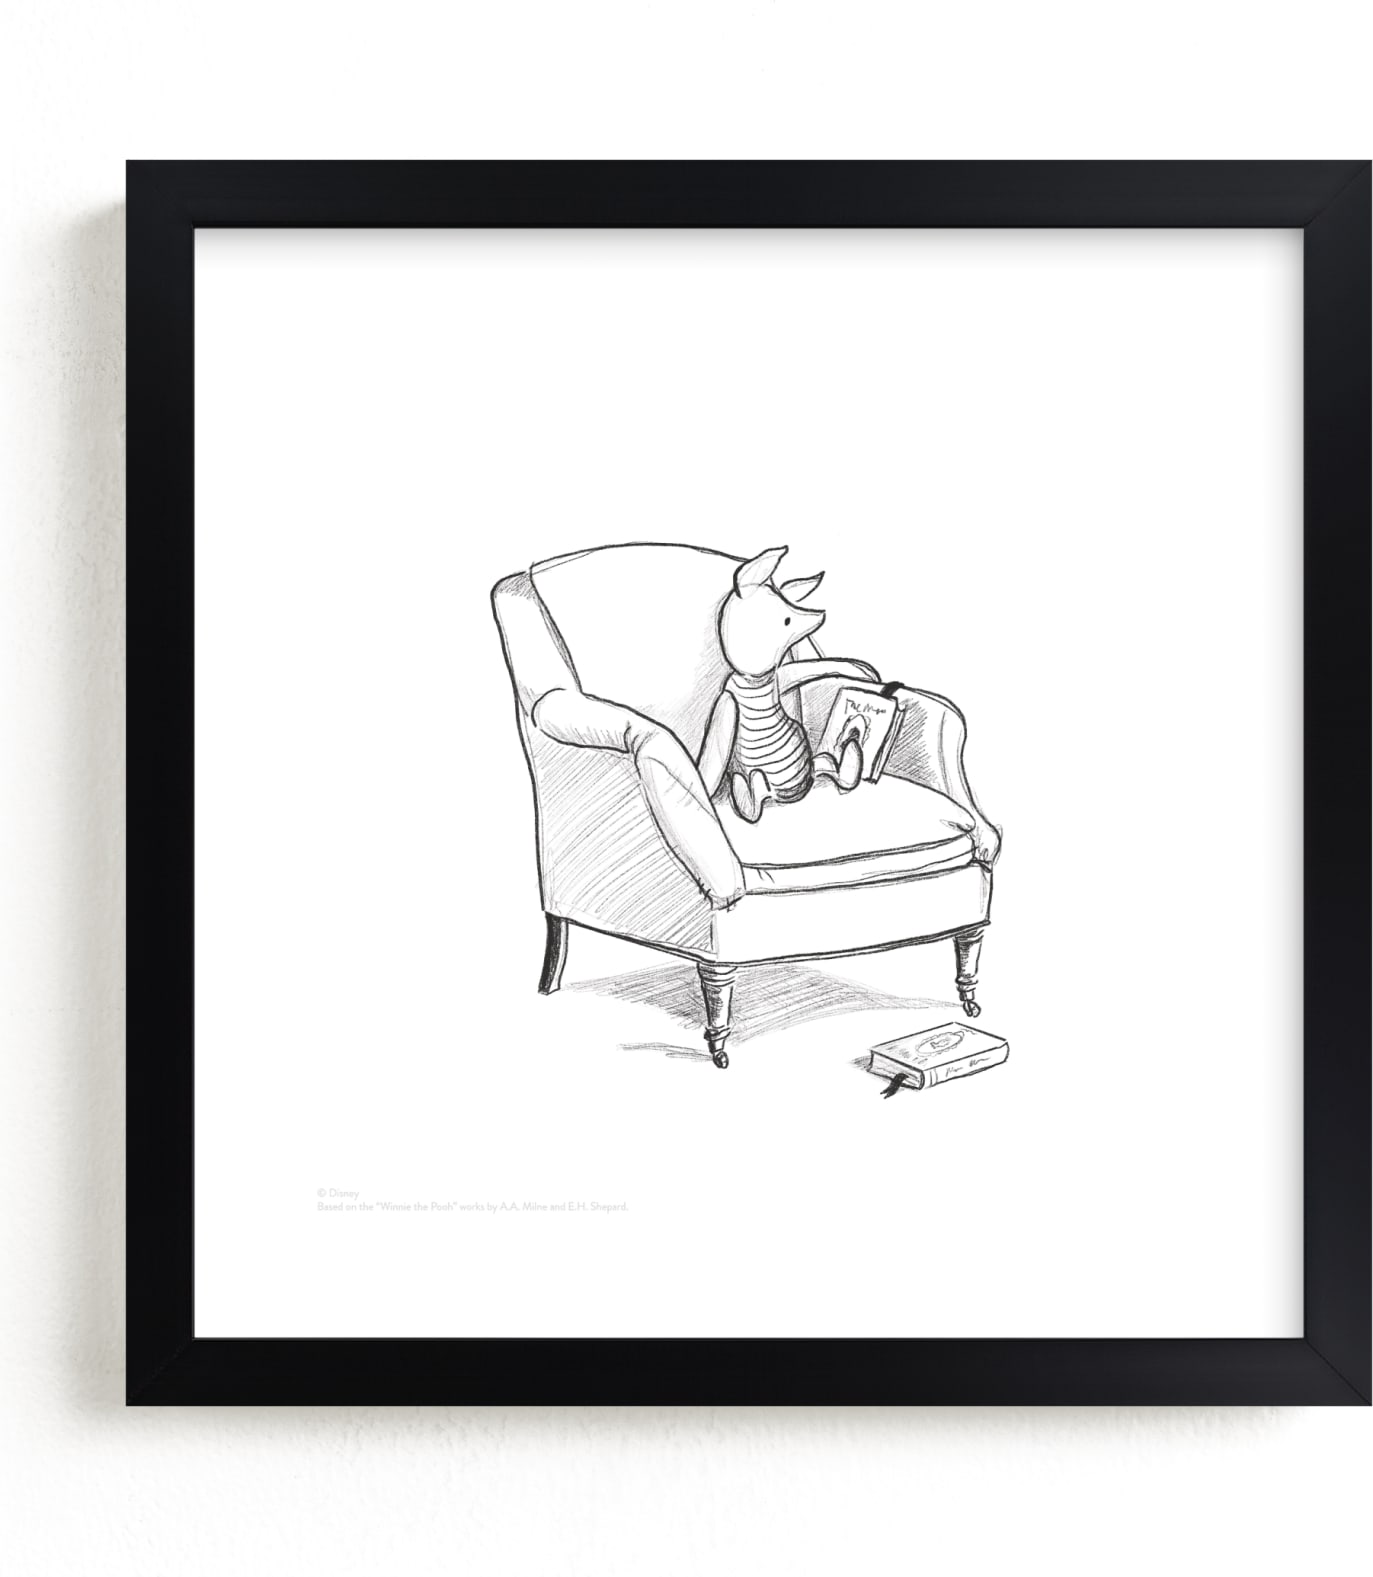 This is a black and white, white disney art by Stefanie Lane called Piglet Lounging from Disney's Winnie The Pooh.